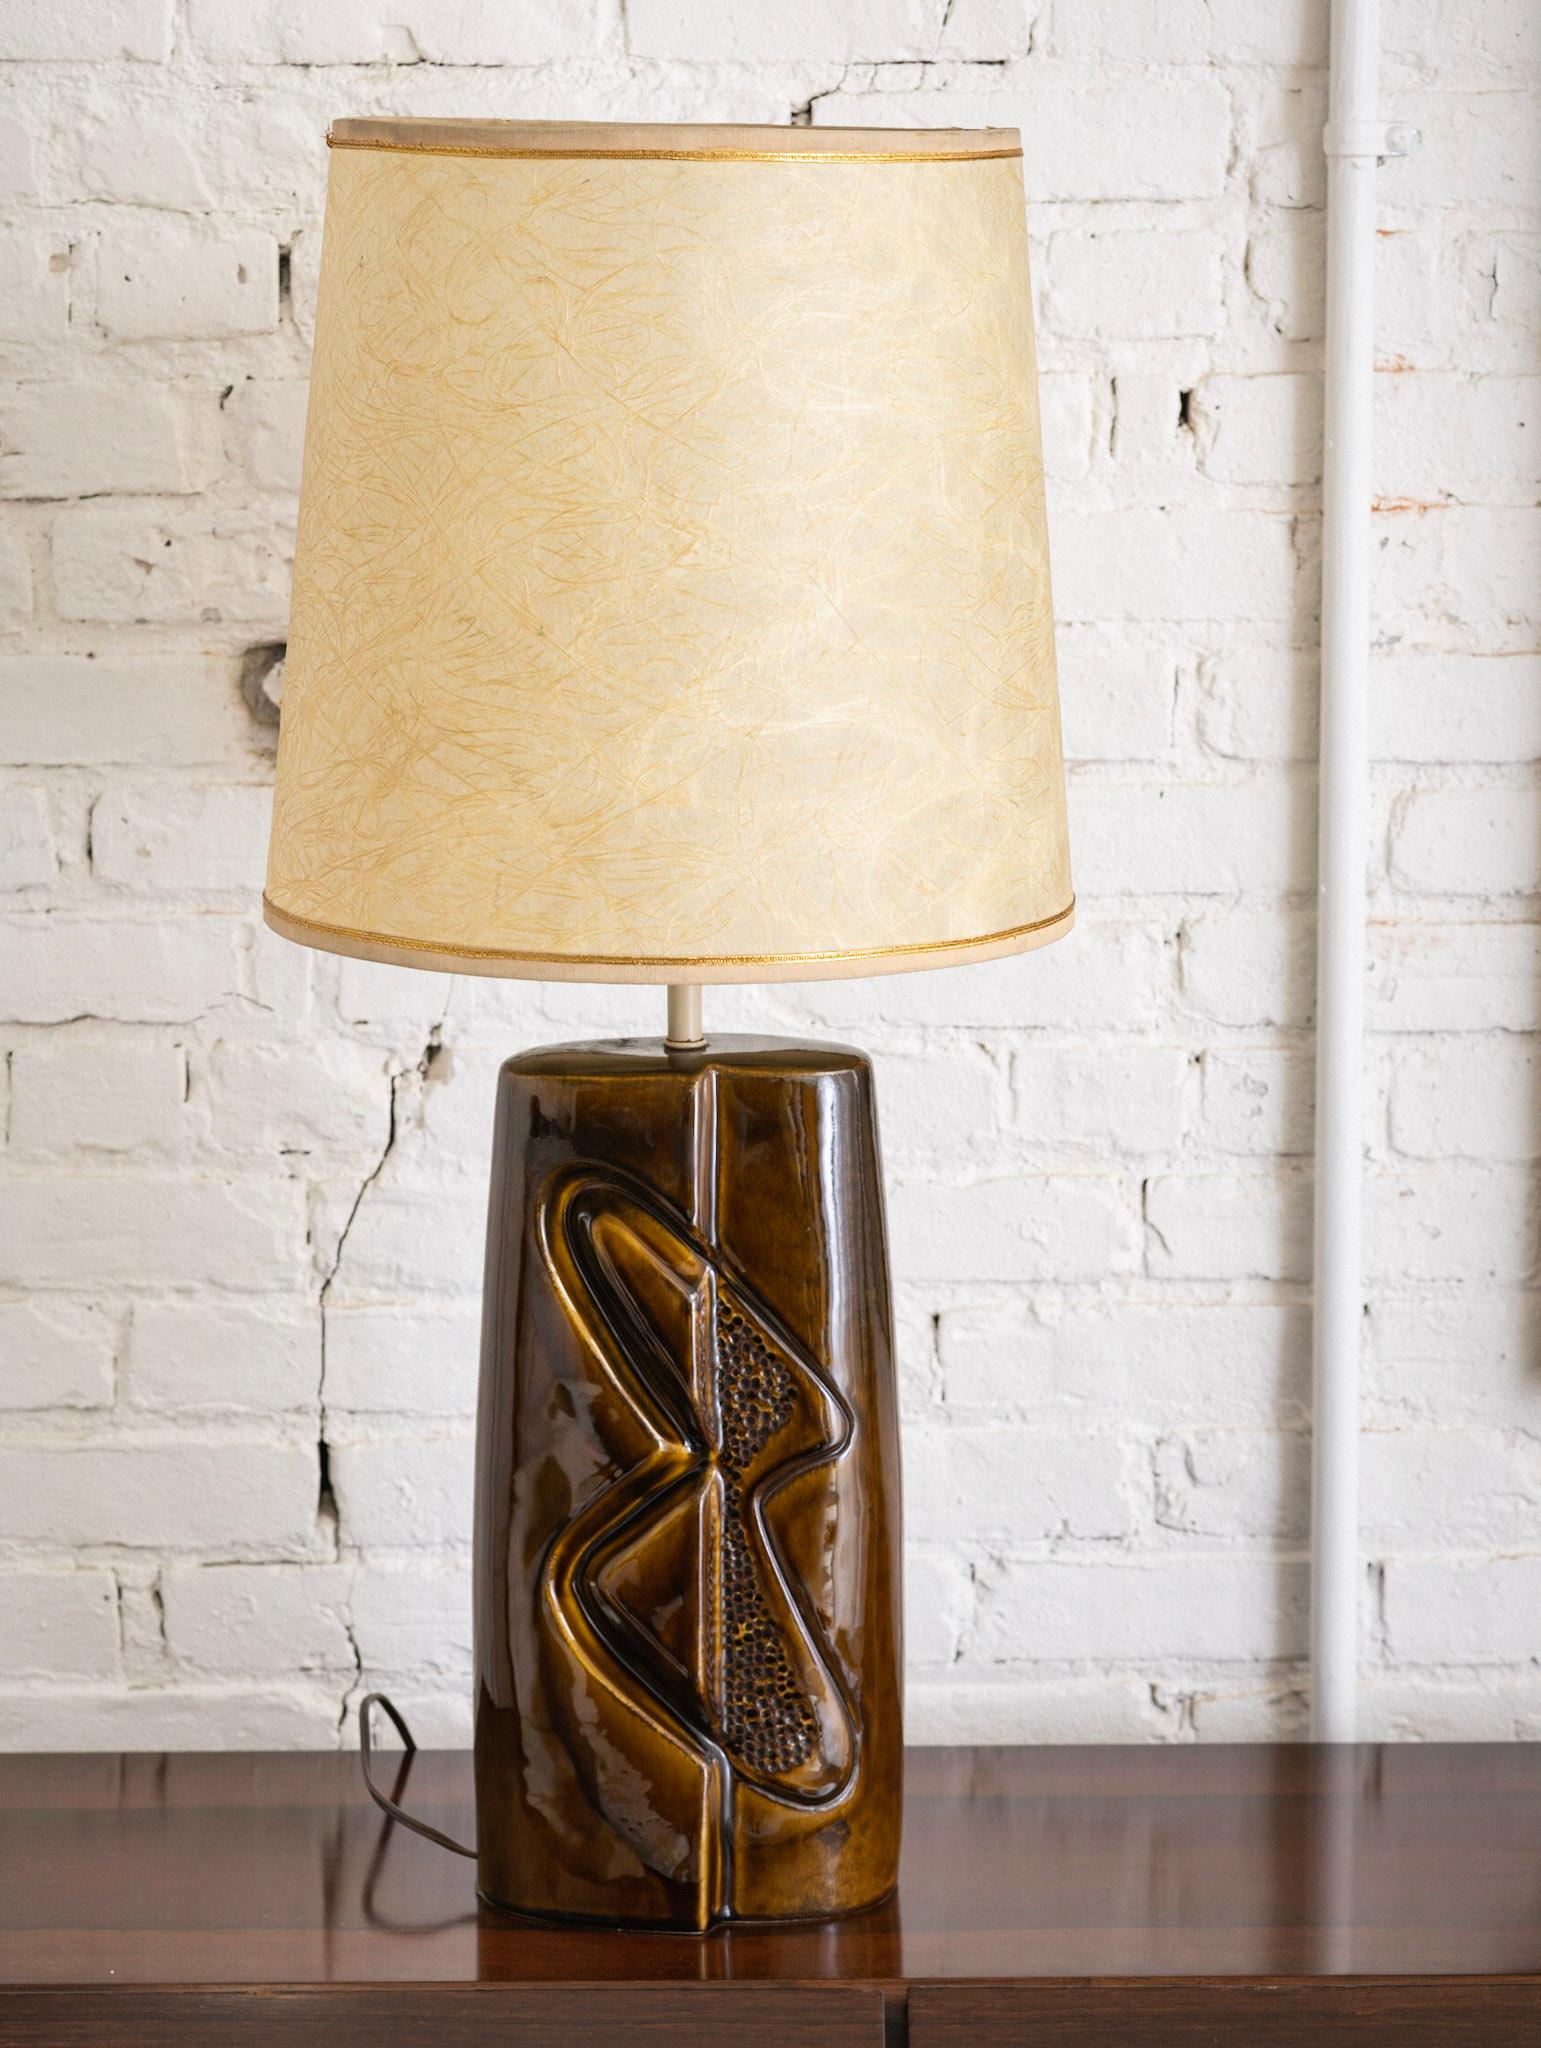 A mid century modern ceramic lamp with abstract 